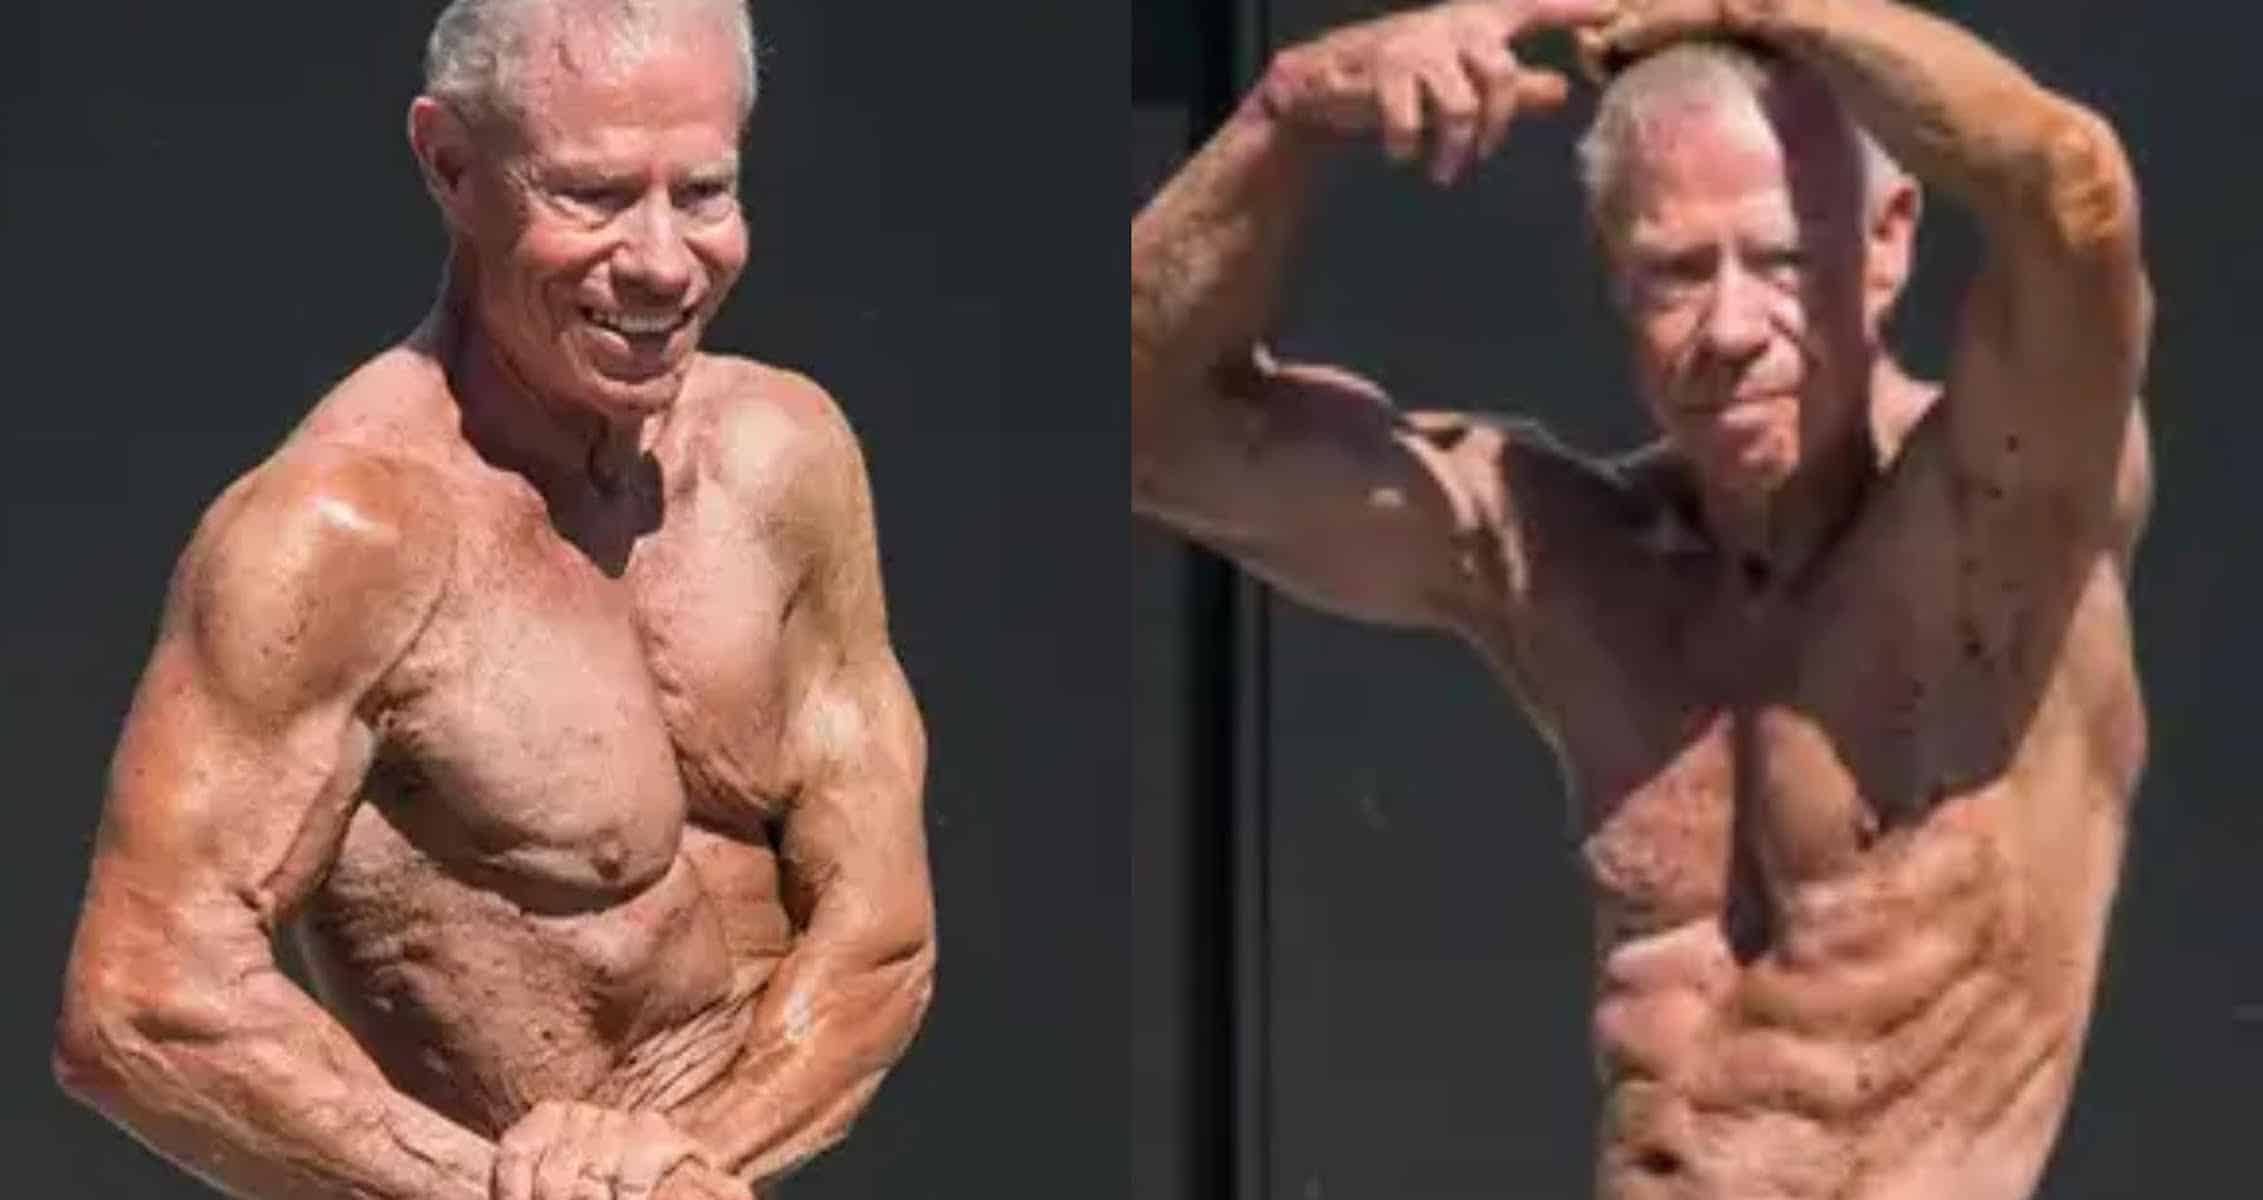 World's oldest bodybuilder still going strong at 90 years old